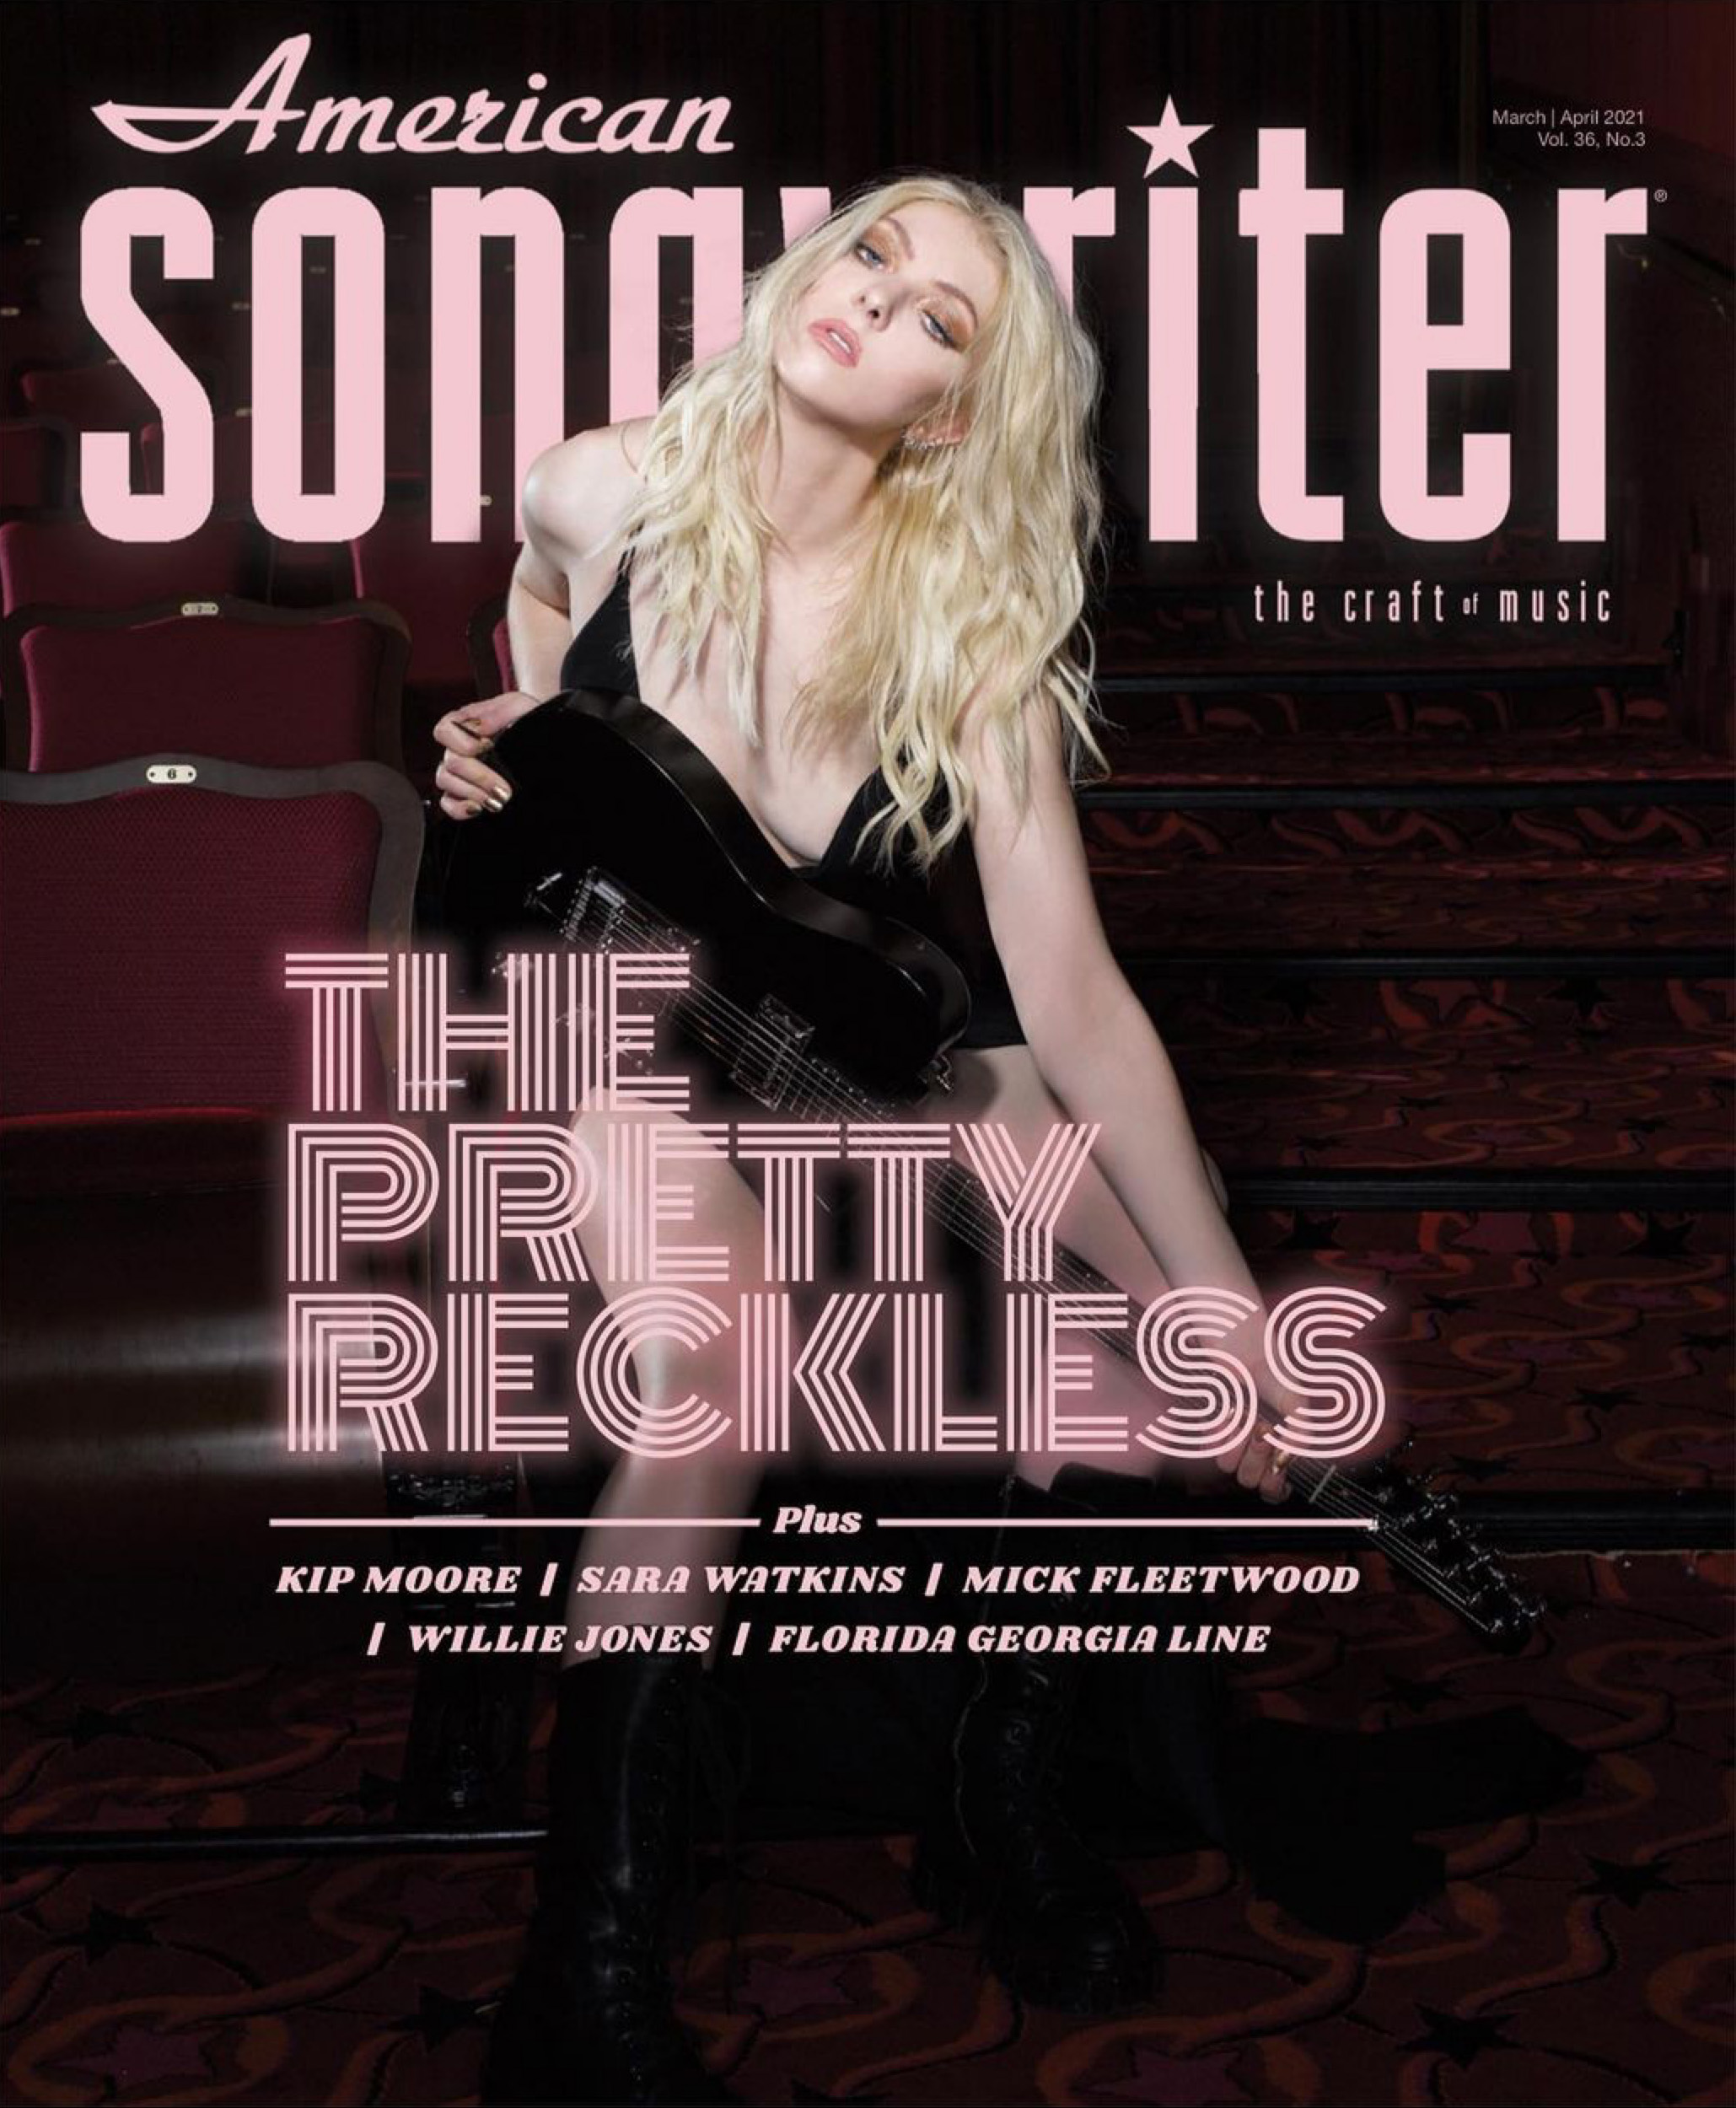 American-Songwriter-March-2021-Taylor-Momsen-The-Pretty-Reckless-Magazine-Cover-Photography-by-Indira-Cesarine.jpg